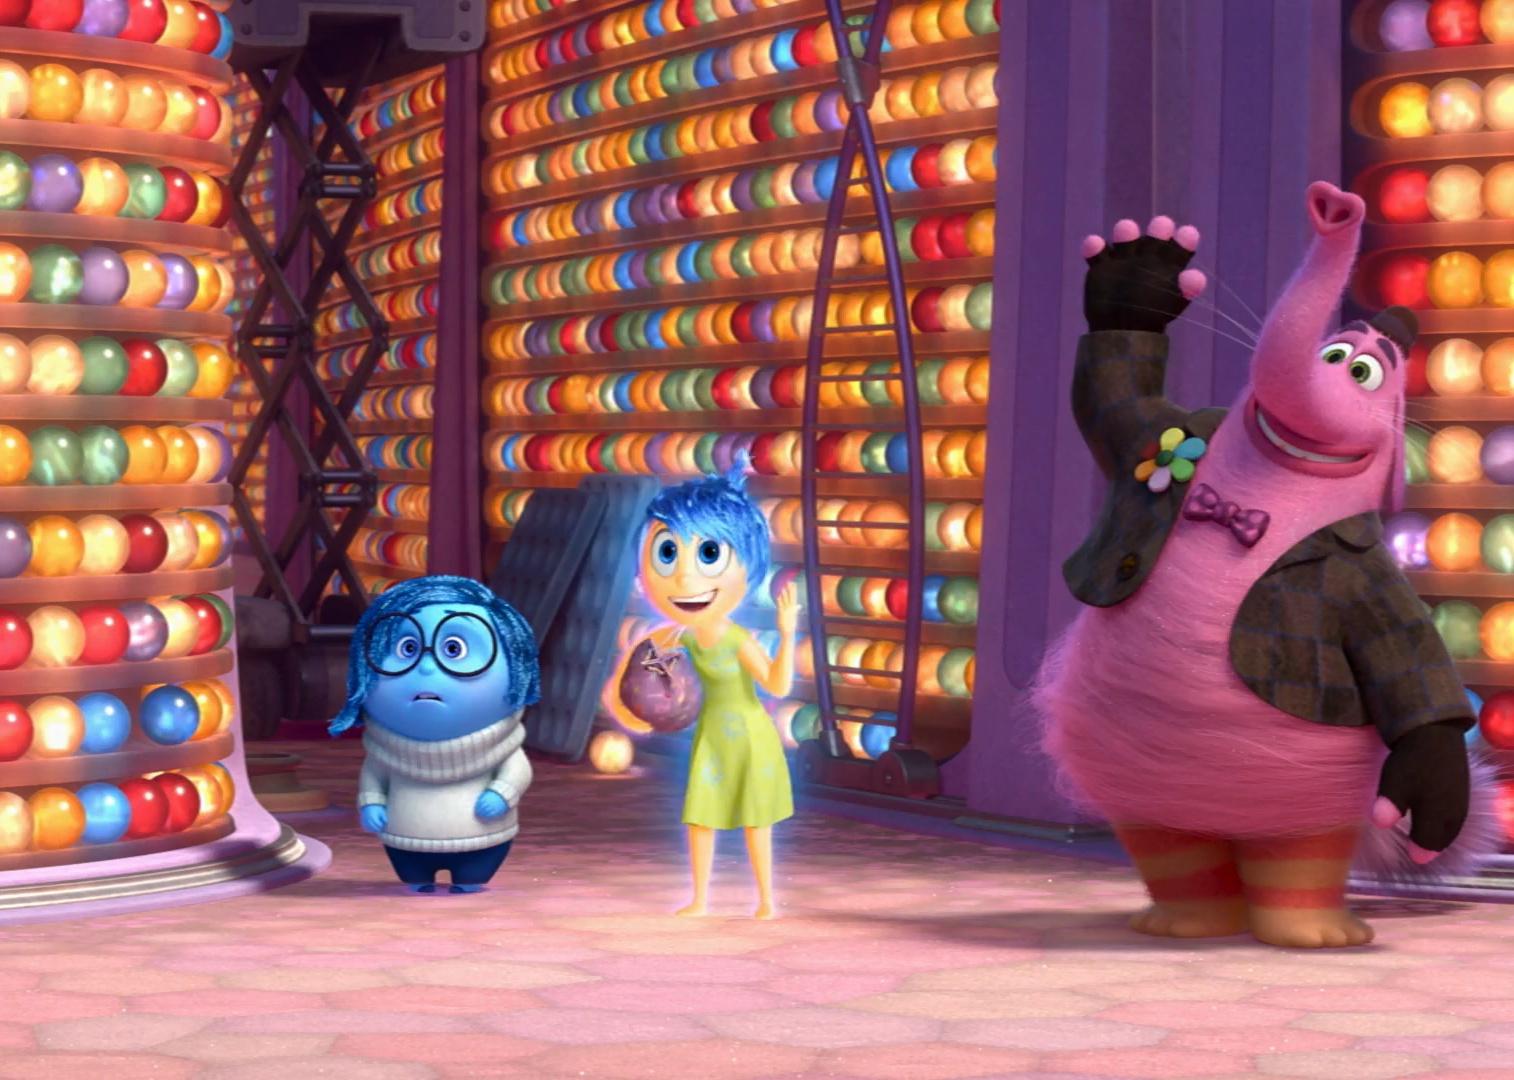 Characters Sadness, Joy, and Bing Bong in a scene from ‘Inside Out.